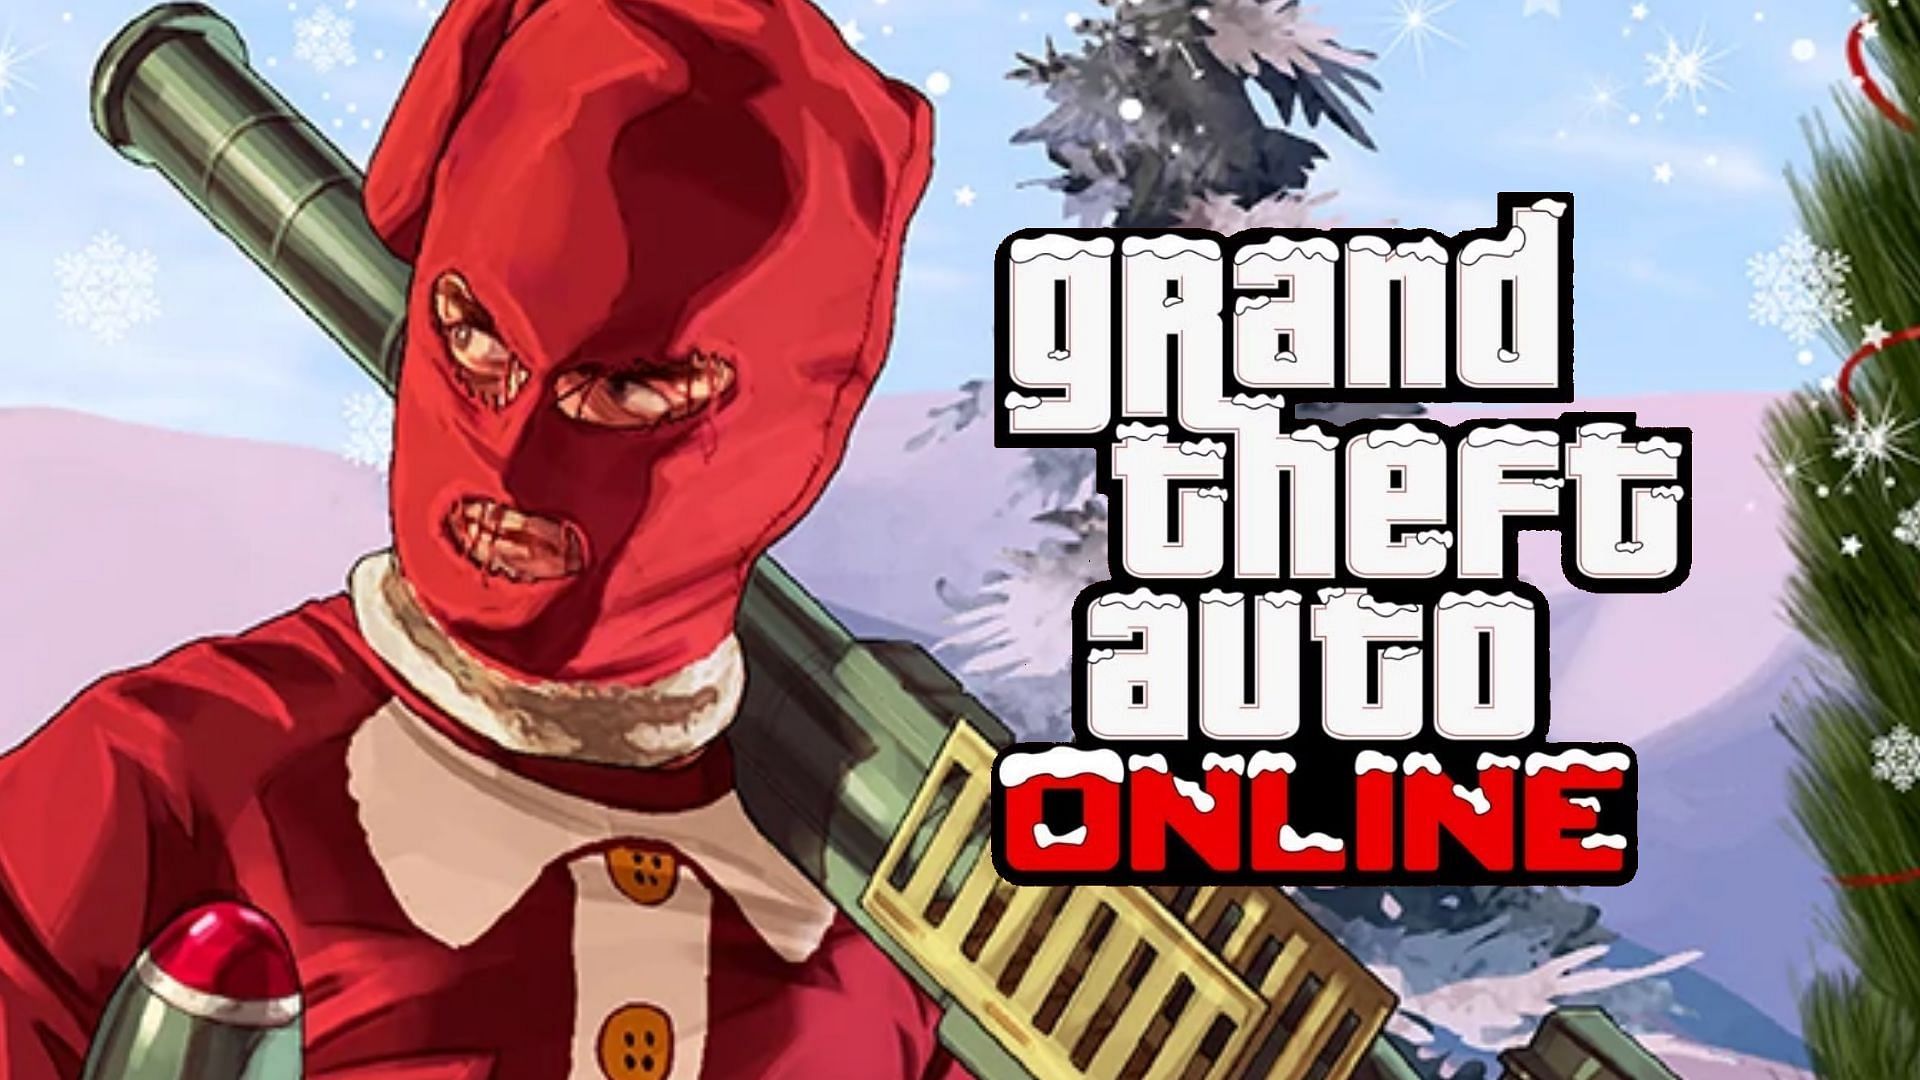 5 of the best changes confirmed in the GTA Online Winter DLC